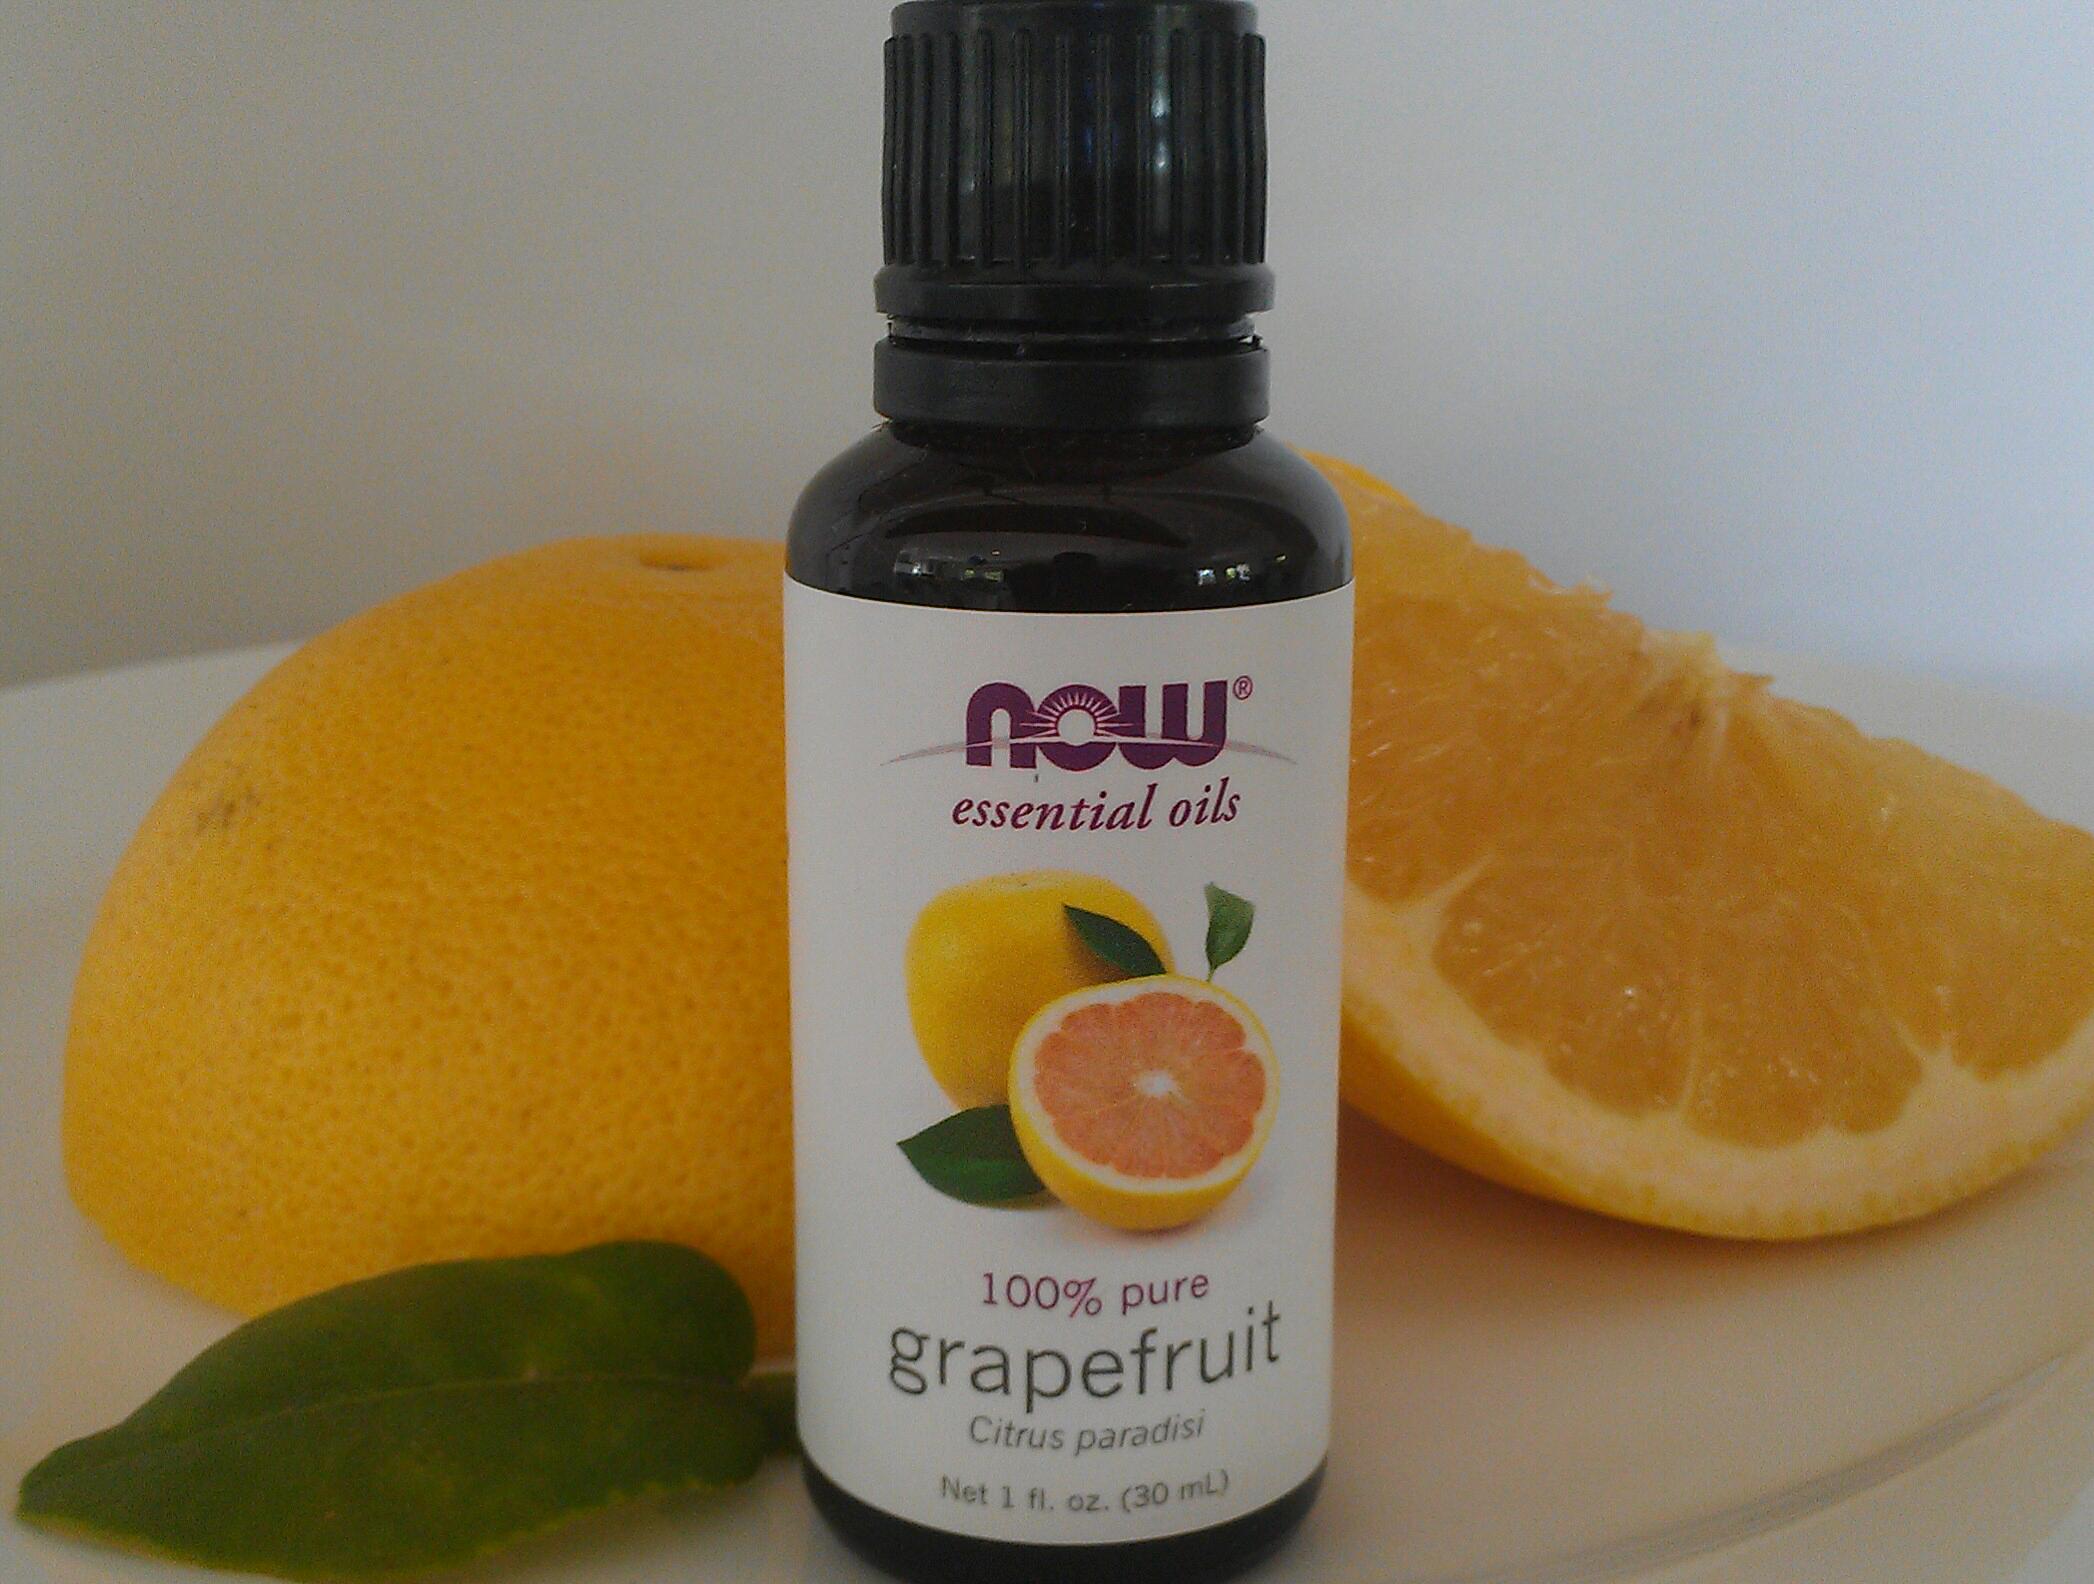 Squash Hunger & Lose Weight by Smelling Grapefruit Essential Oil, Not Lavender